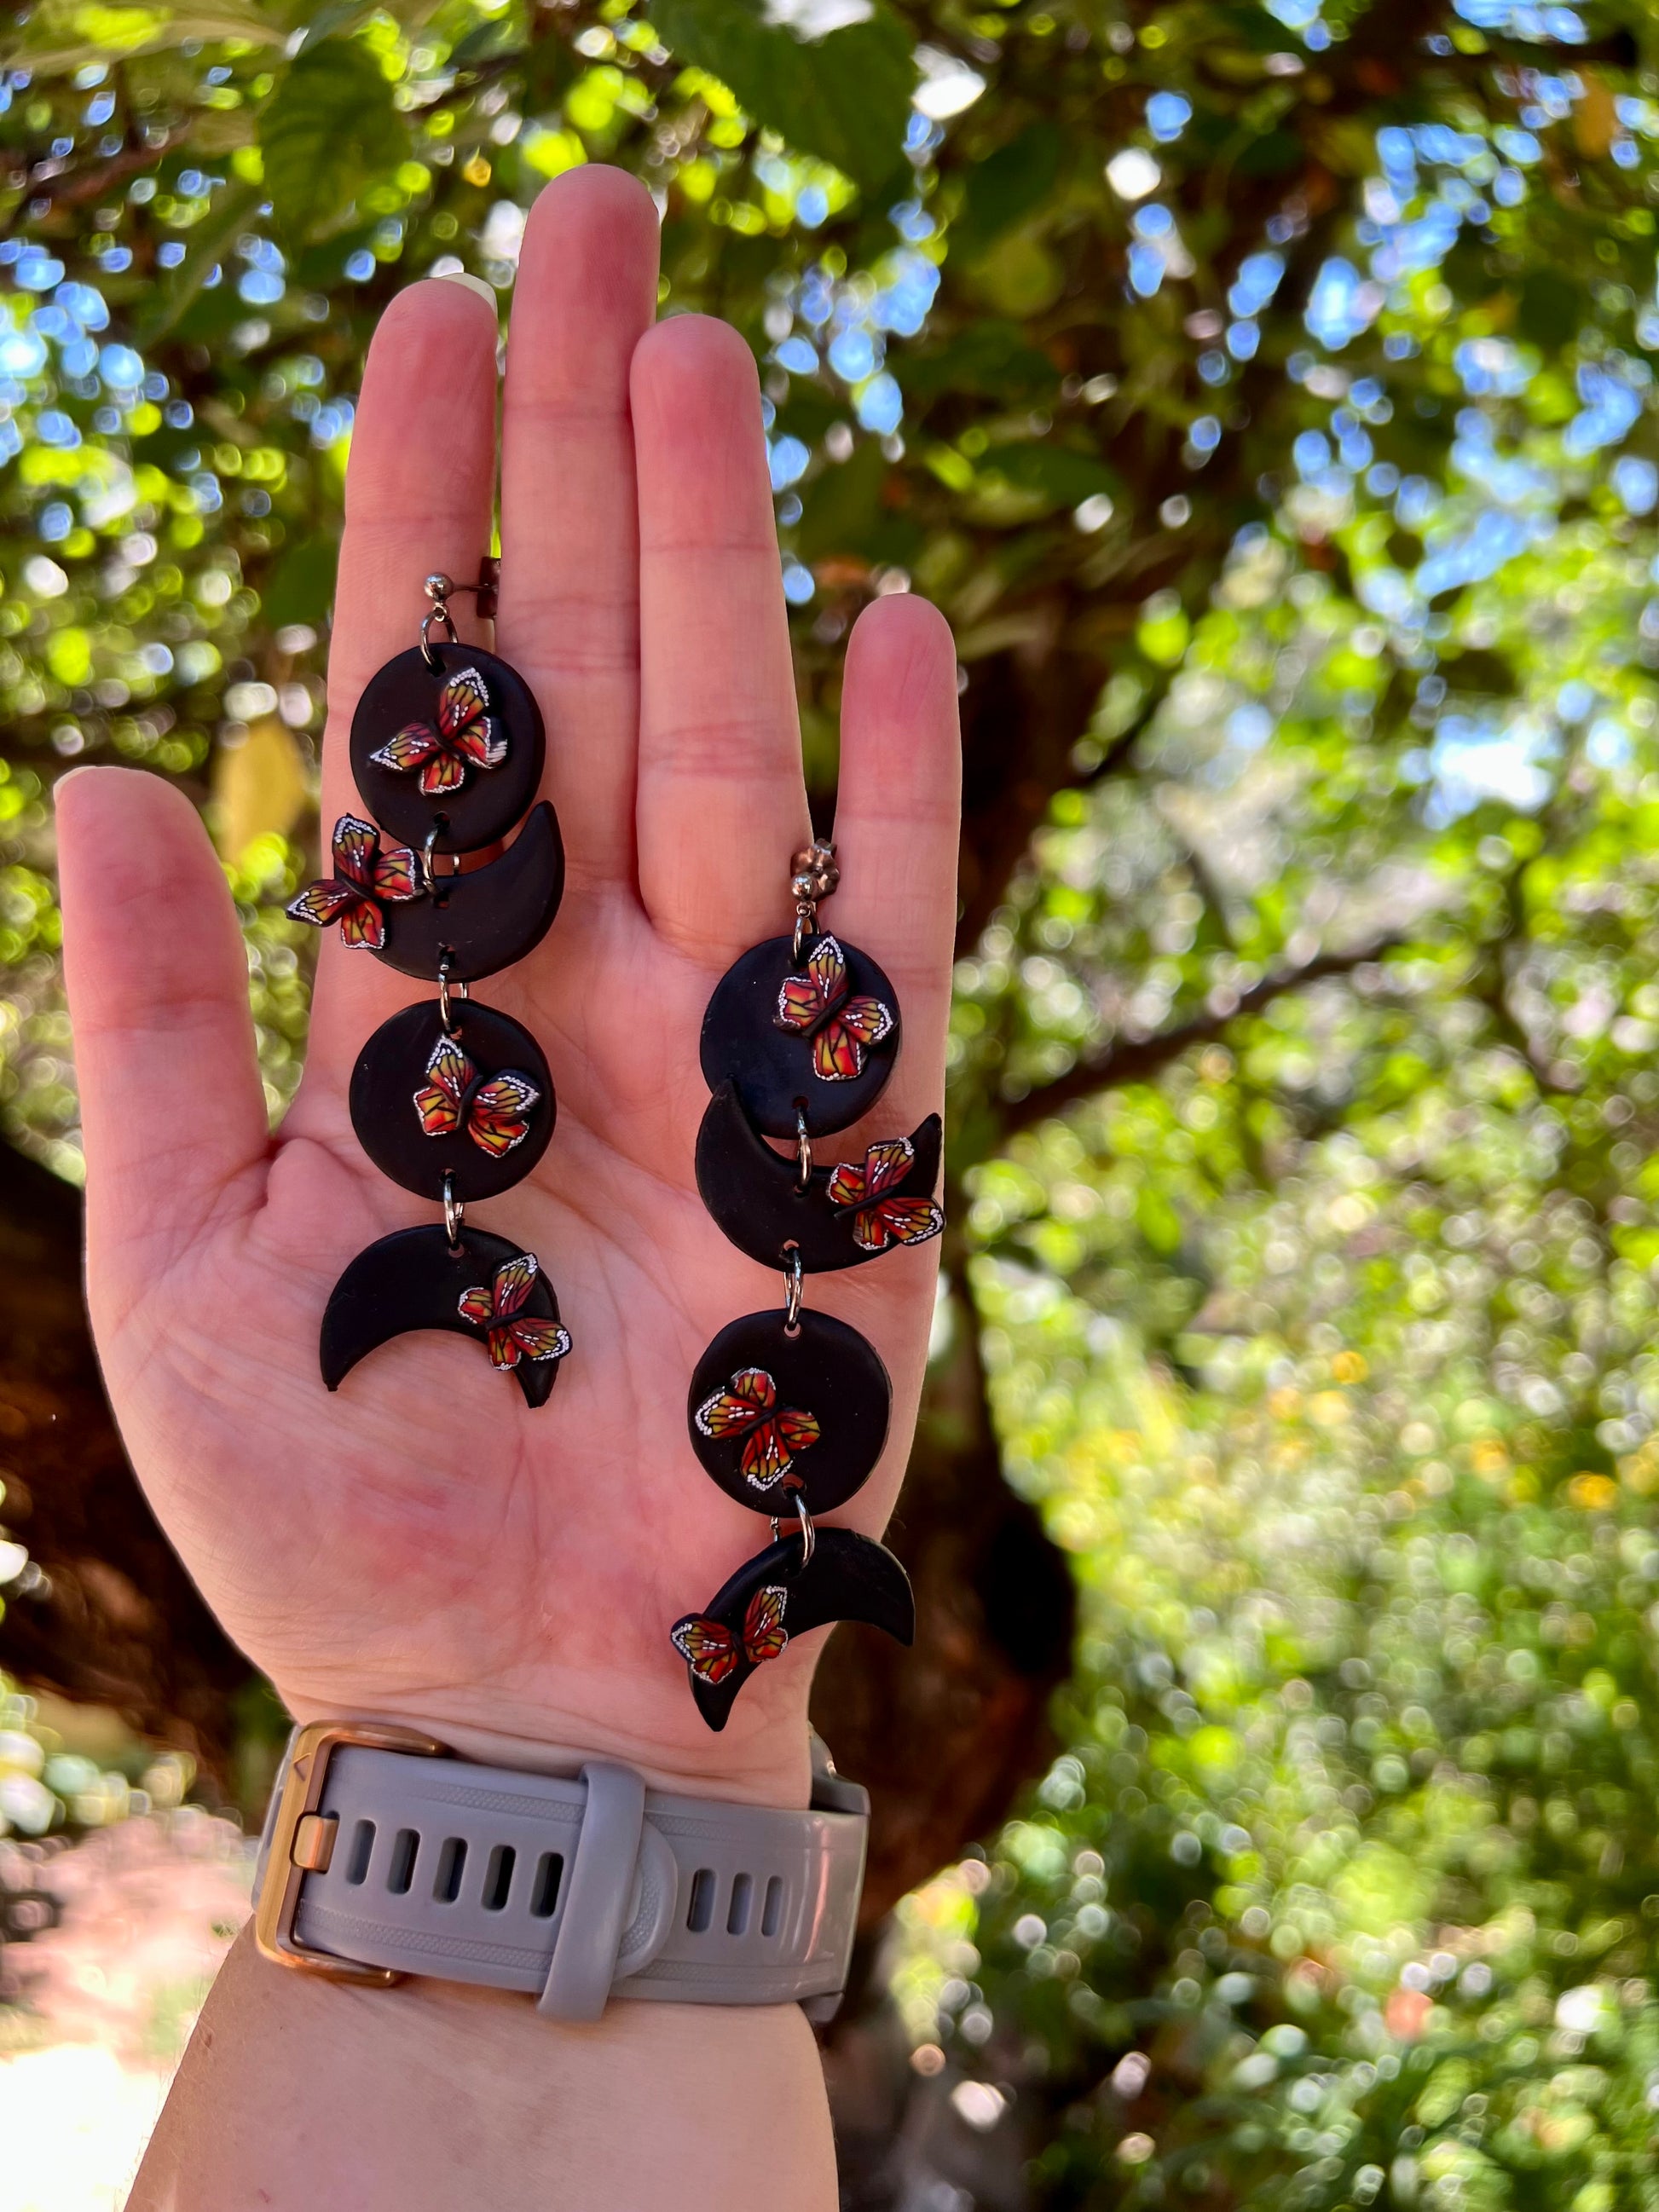 Capture the essence of the monarch butterfly with our handmade polymer clay earrings. Crafted using the Cane technique, each pair represents the journey of rebirth and transformation.